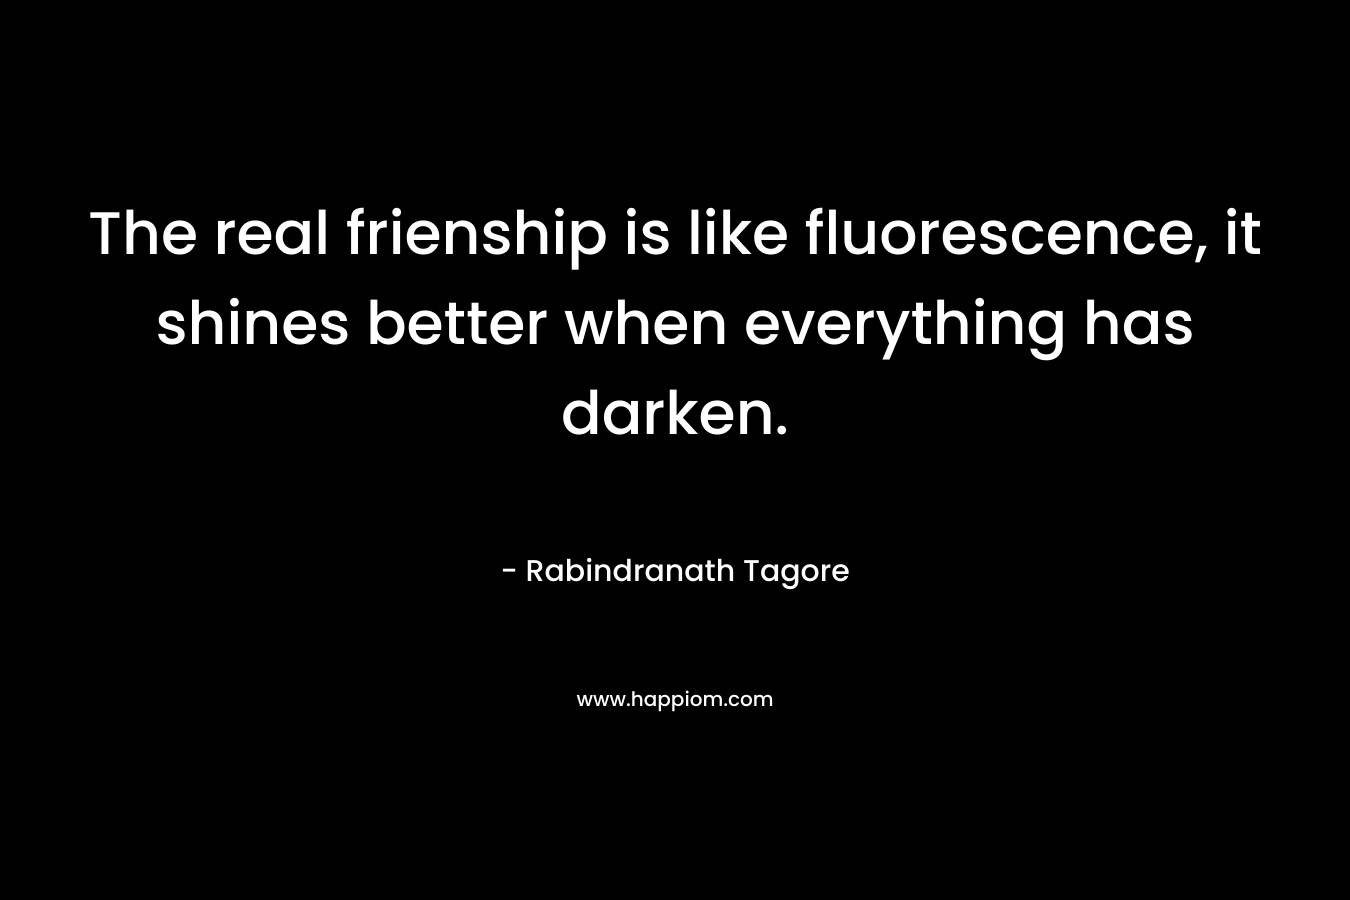 The real frienship is like fluorescence, it shines better when everything has darken. – Rabindranath Tagore